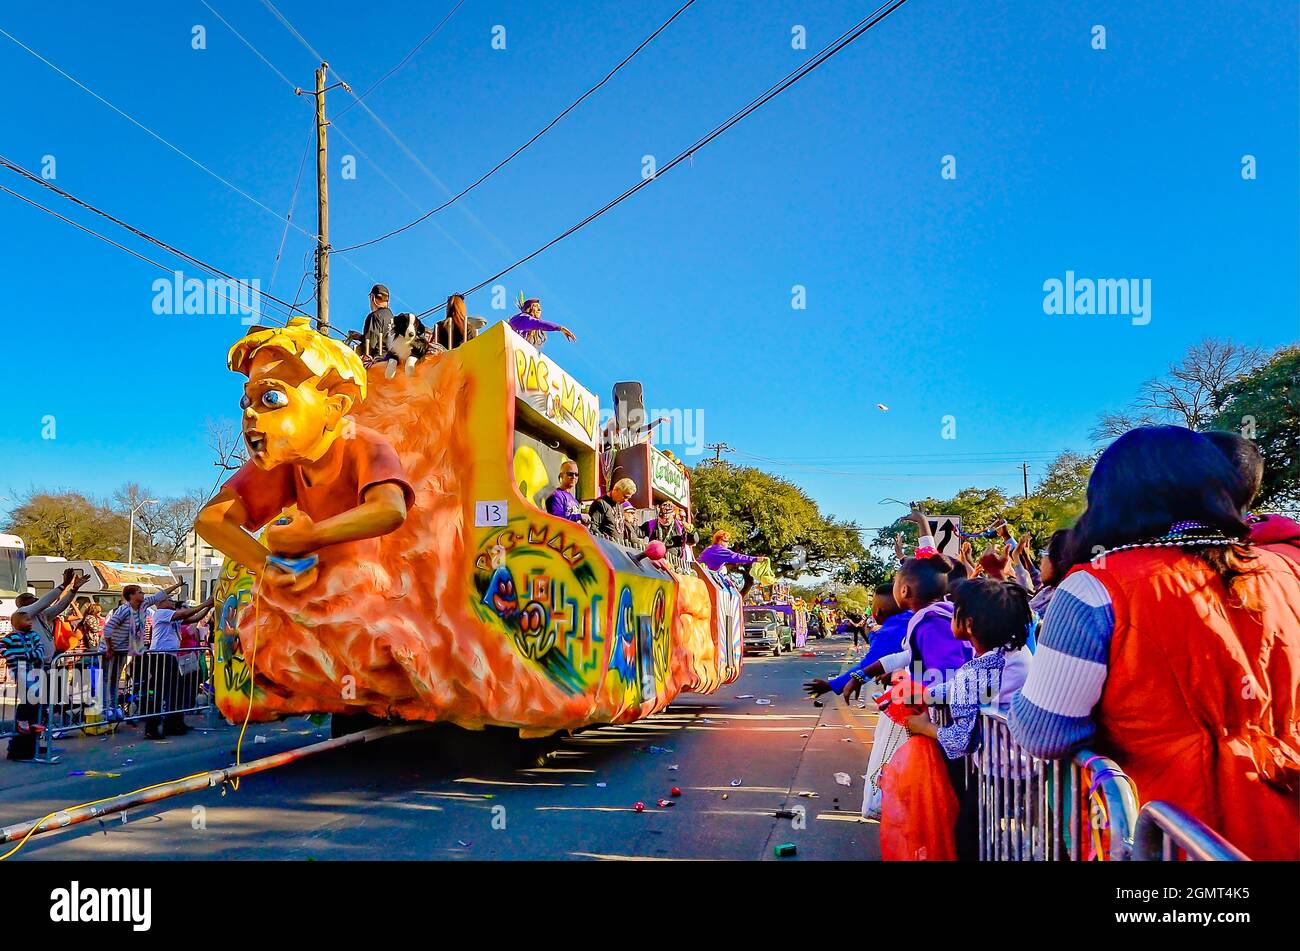 A Pac-Man Mardi Gras float makes its way down the street during the Joe Cain Day Mardi Gras parade, Feb. 7, 2016, in Mobile, Alabama. Stock Photo